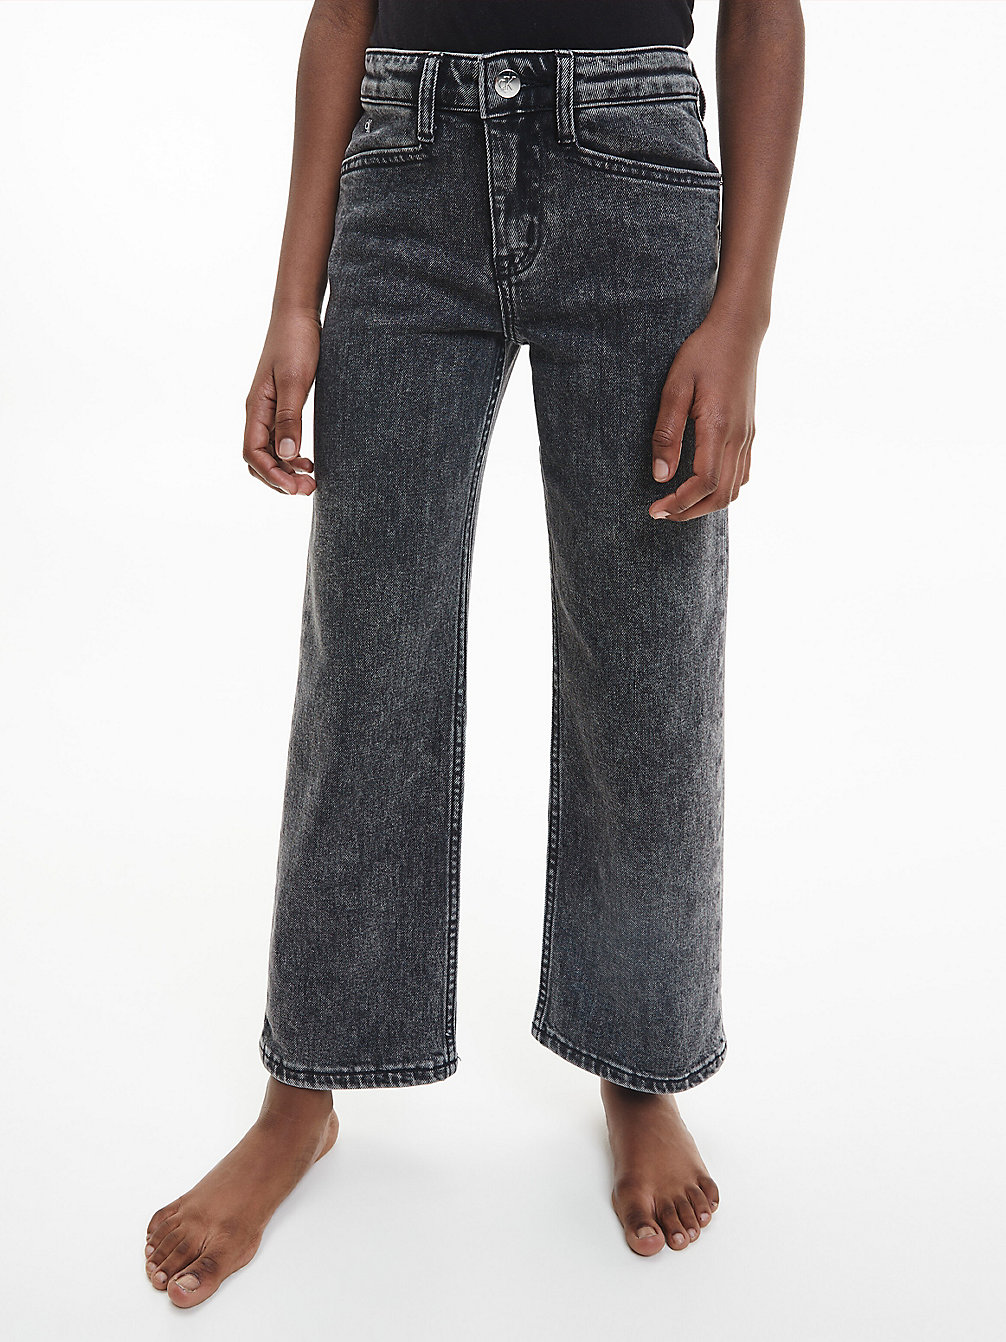 WASHED GREY High Rise Wide Leg Jeans undefined girls Calvin Klein